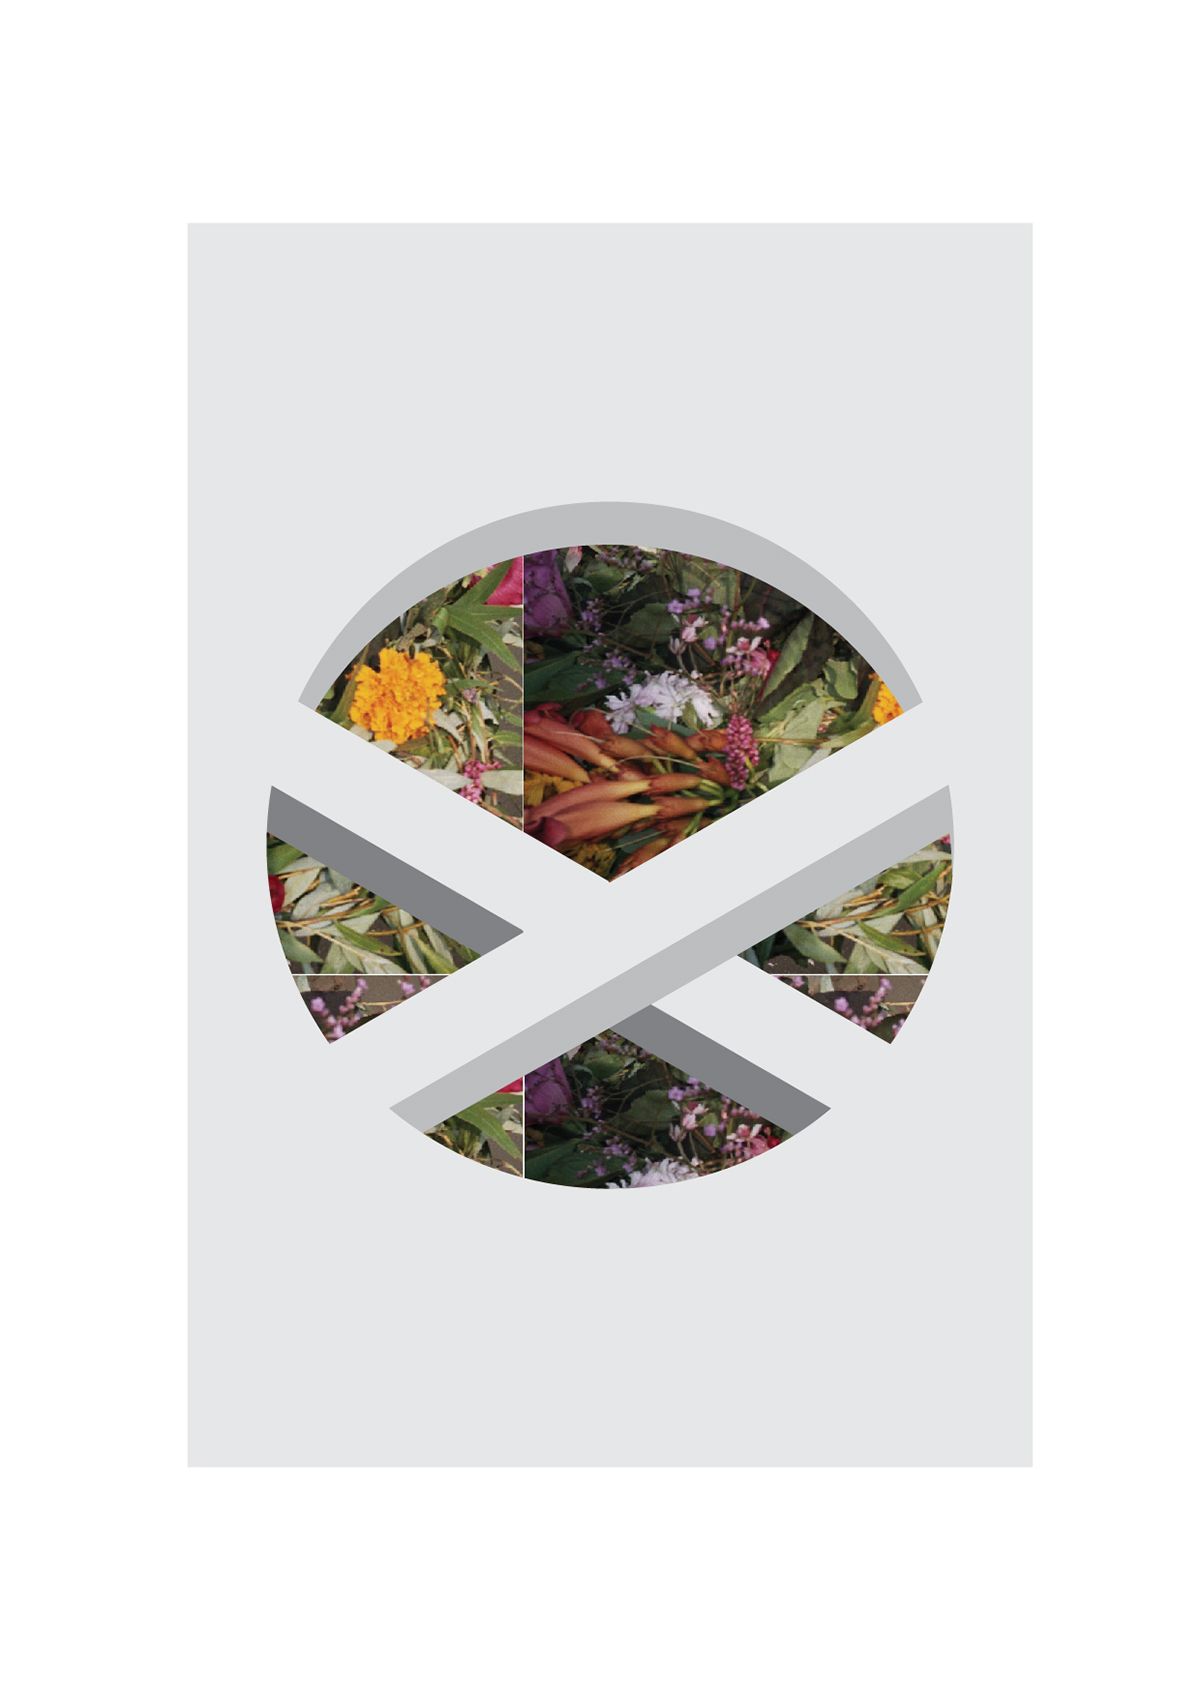 Matchbox impossible object Oscar Reutersvärd  package Flowers pattern vectors illusion optical circle photograph collage grey grid